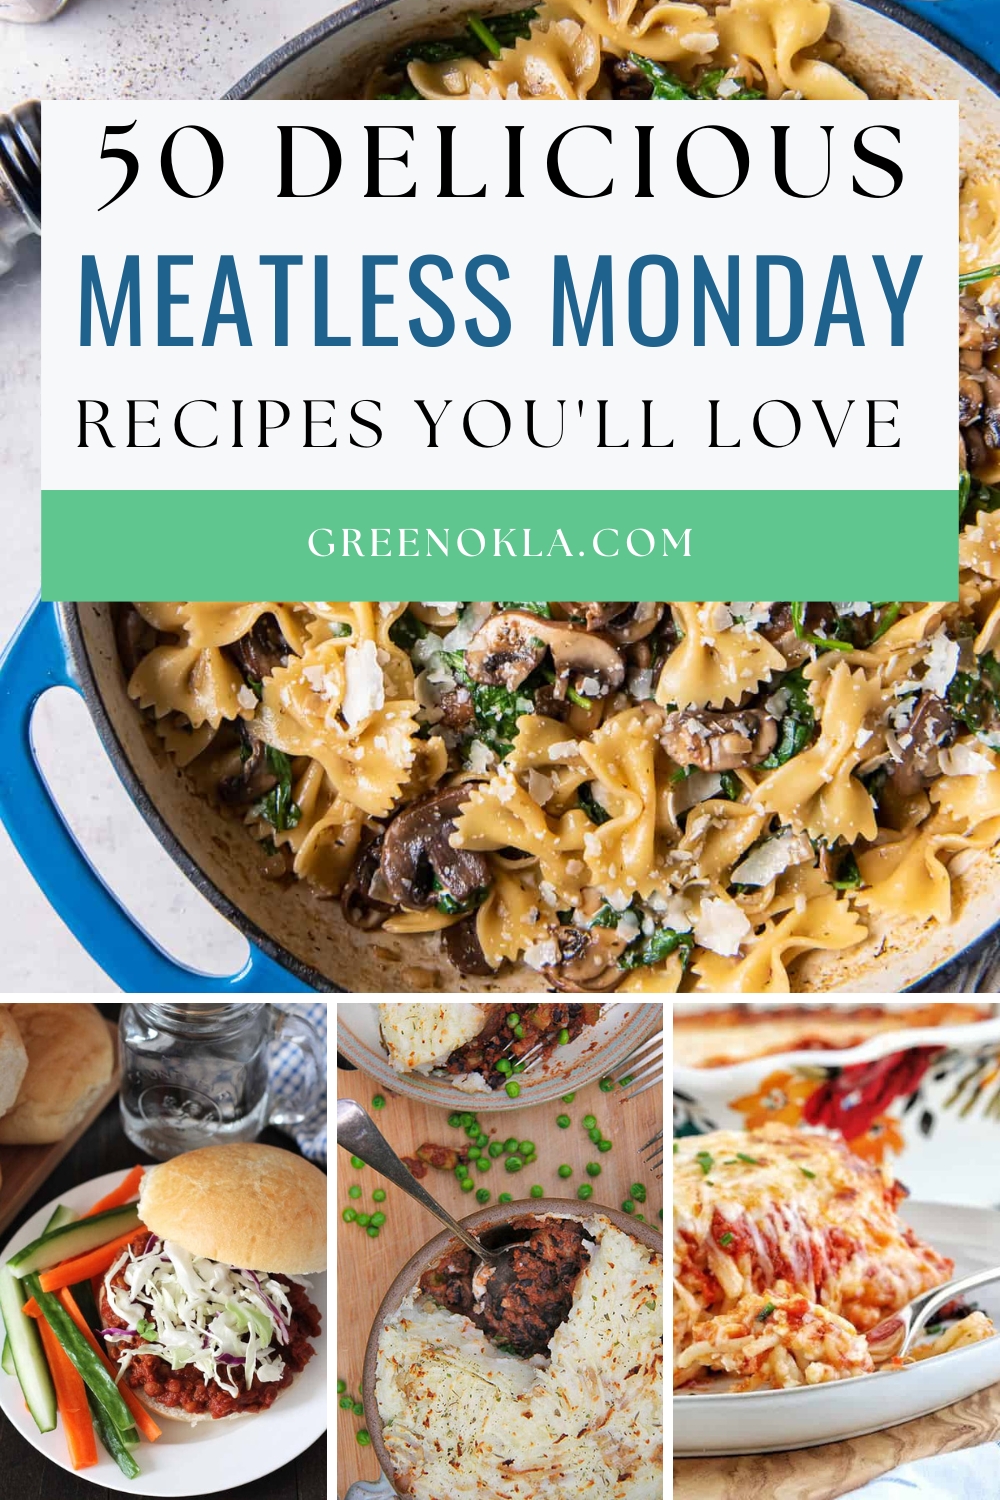 collage of meatless recipes with text 50 delicious meatless Monday recipes you'll love